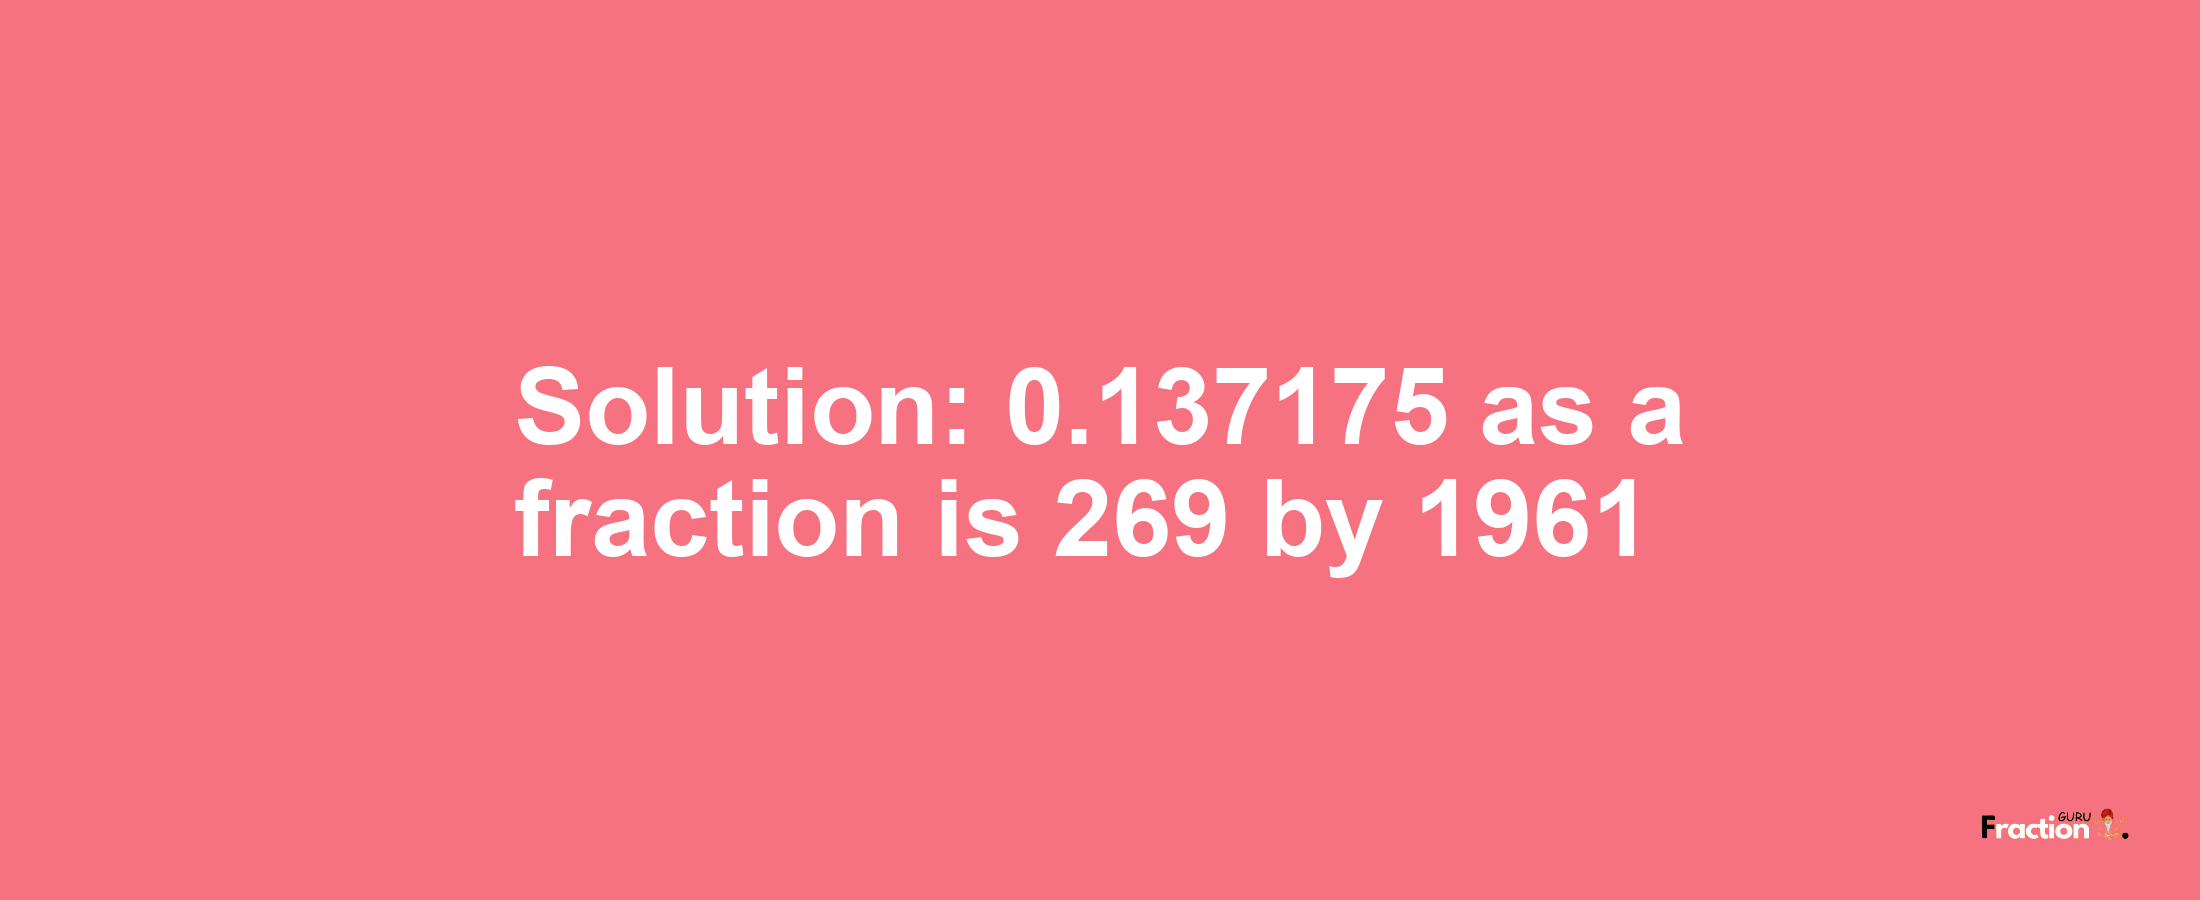 Solution:0.137175 as a fraction is 269/1961